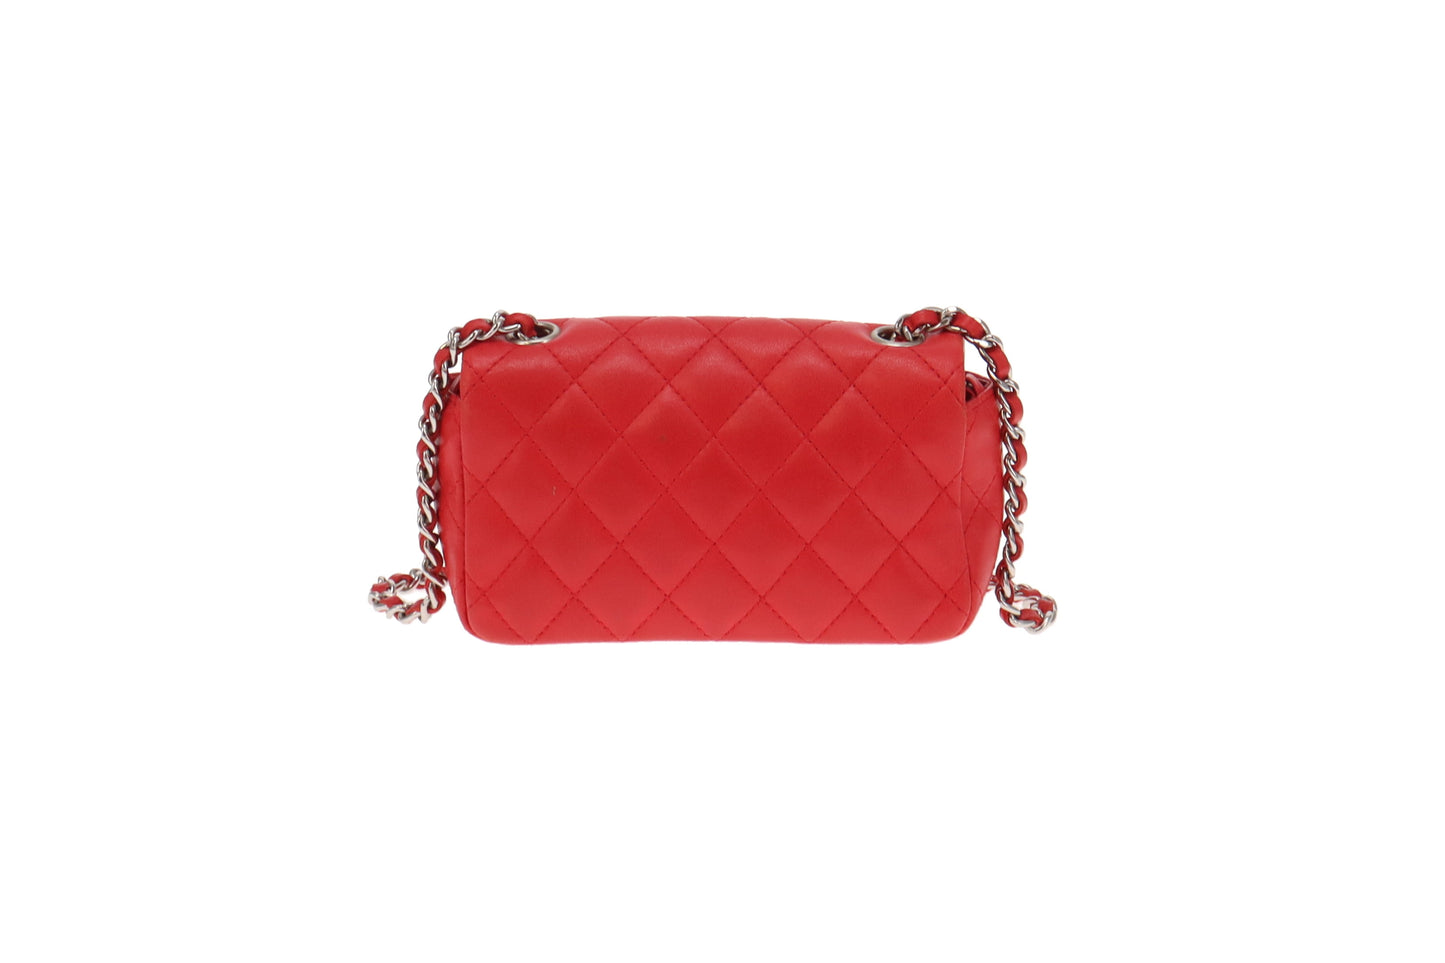 Chanel Coral Red Lambskin SHW Extra Mini Flap Bag 2004/05